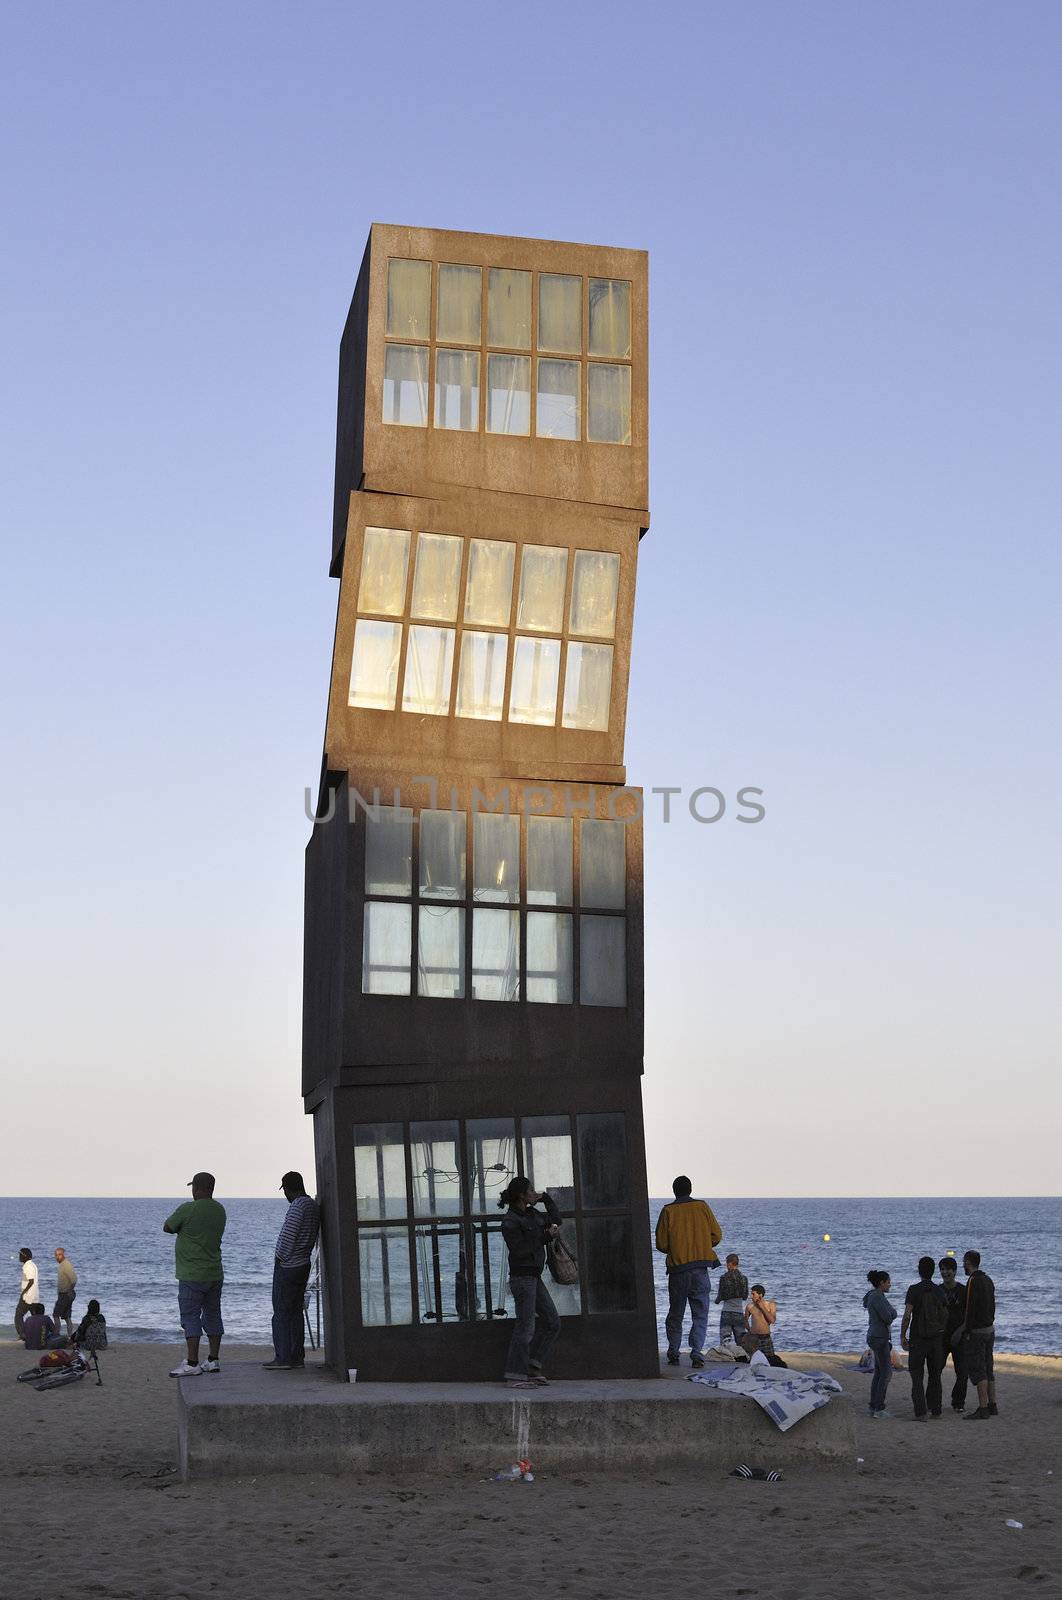 Barcelona, Spain - June 21, 2010 : people rest on the famous Berceloneta beach at evening close to "Homage to Barceloneta" modern art sculpture made by Rebecca Horn.